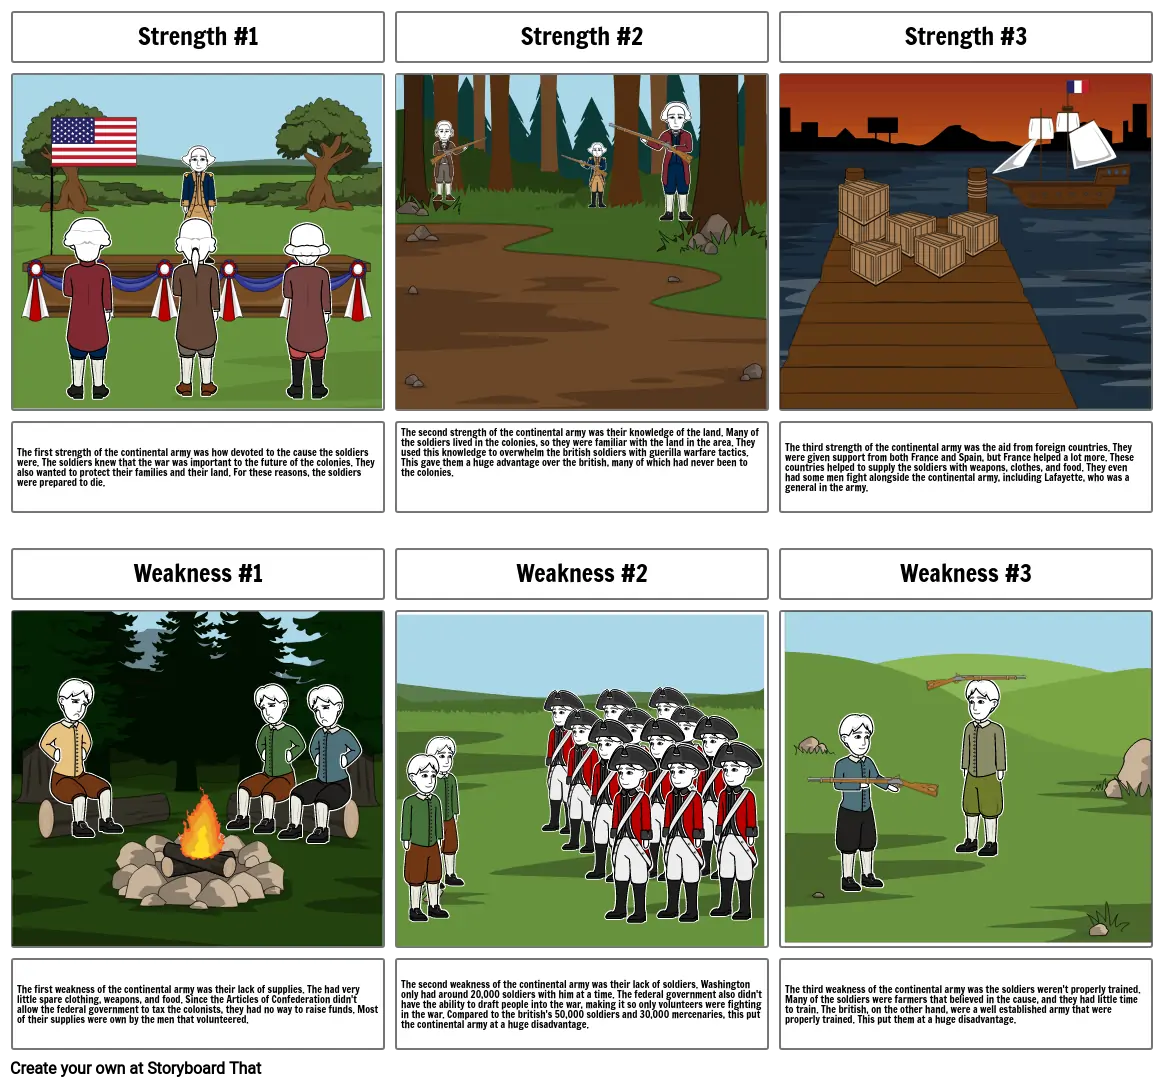 Strengths and Weaknesses of the Continental Army